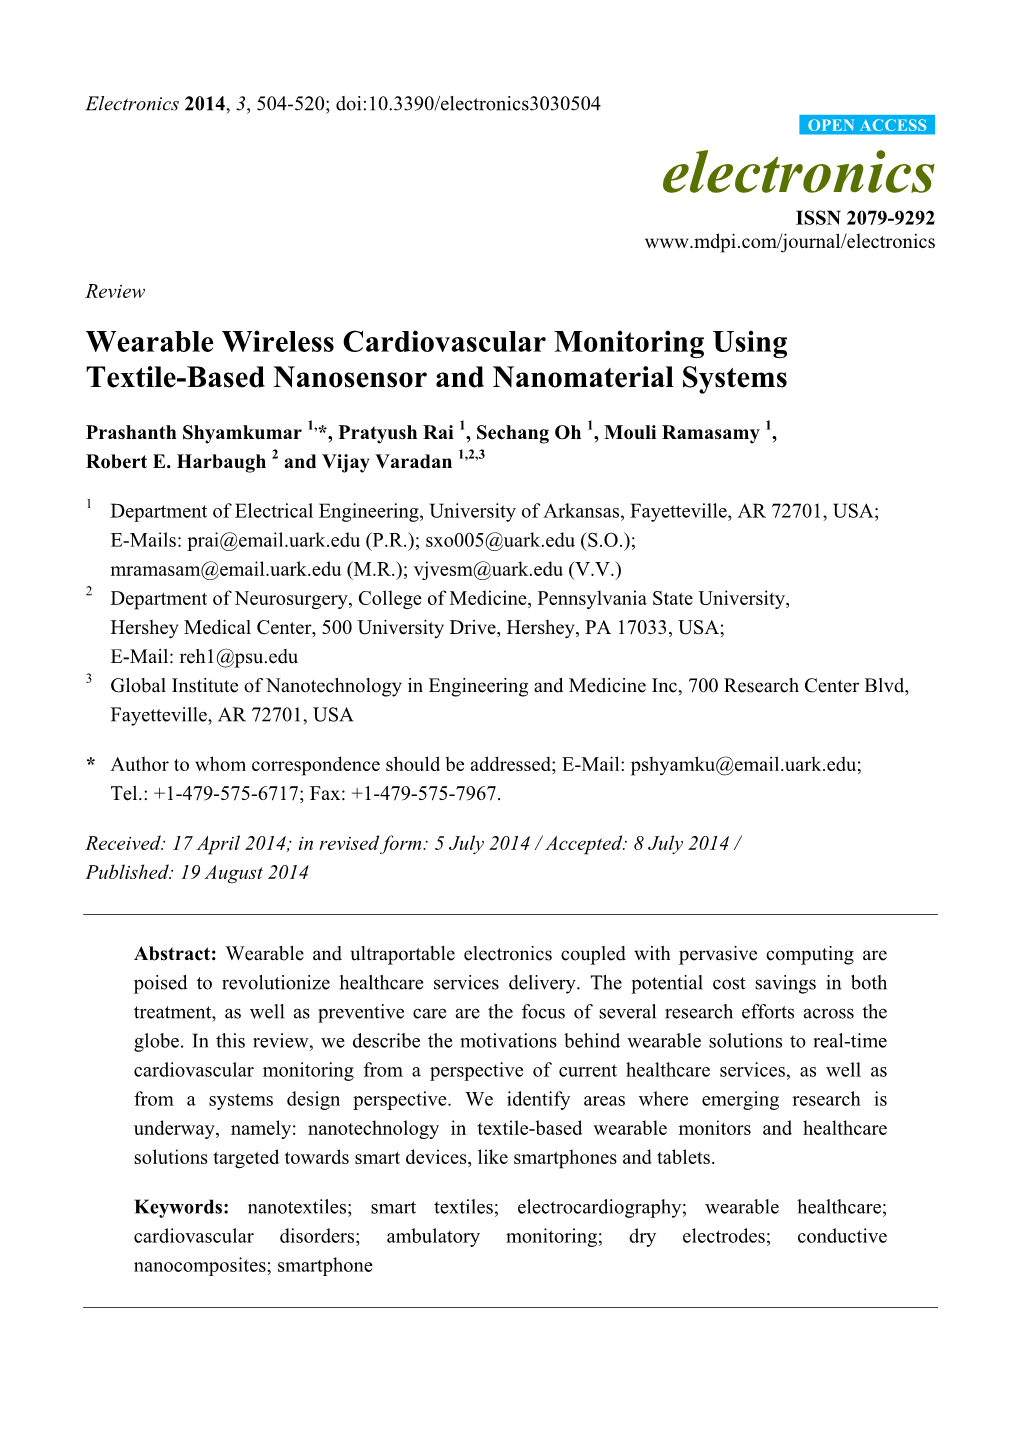 Wearable Wireless Cardiovascular Monitoring Using Textile-Based Nanosensor and Nanomaterial Systems